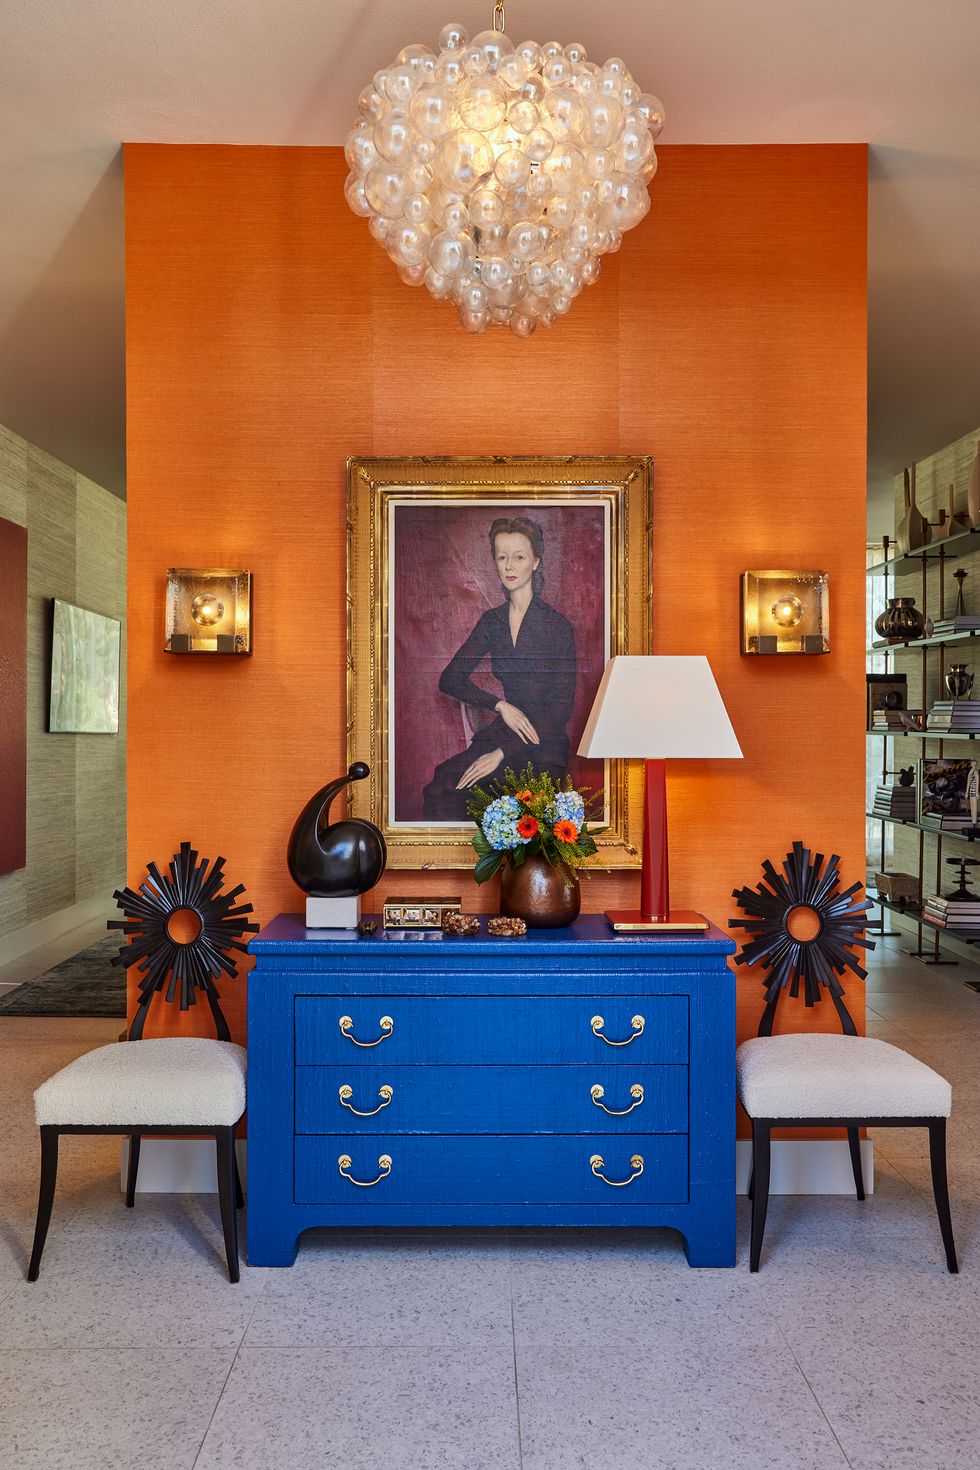 Entrance hall with a blue dresser and a painting on the orange wall